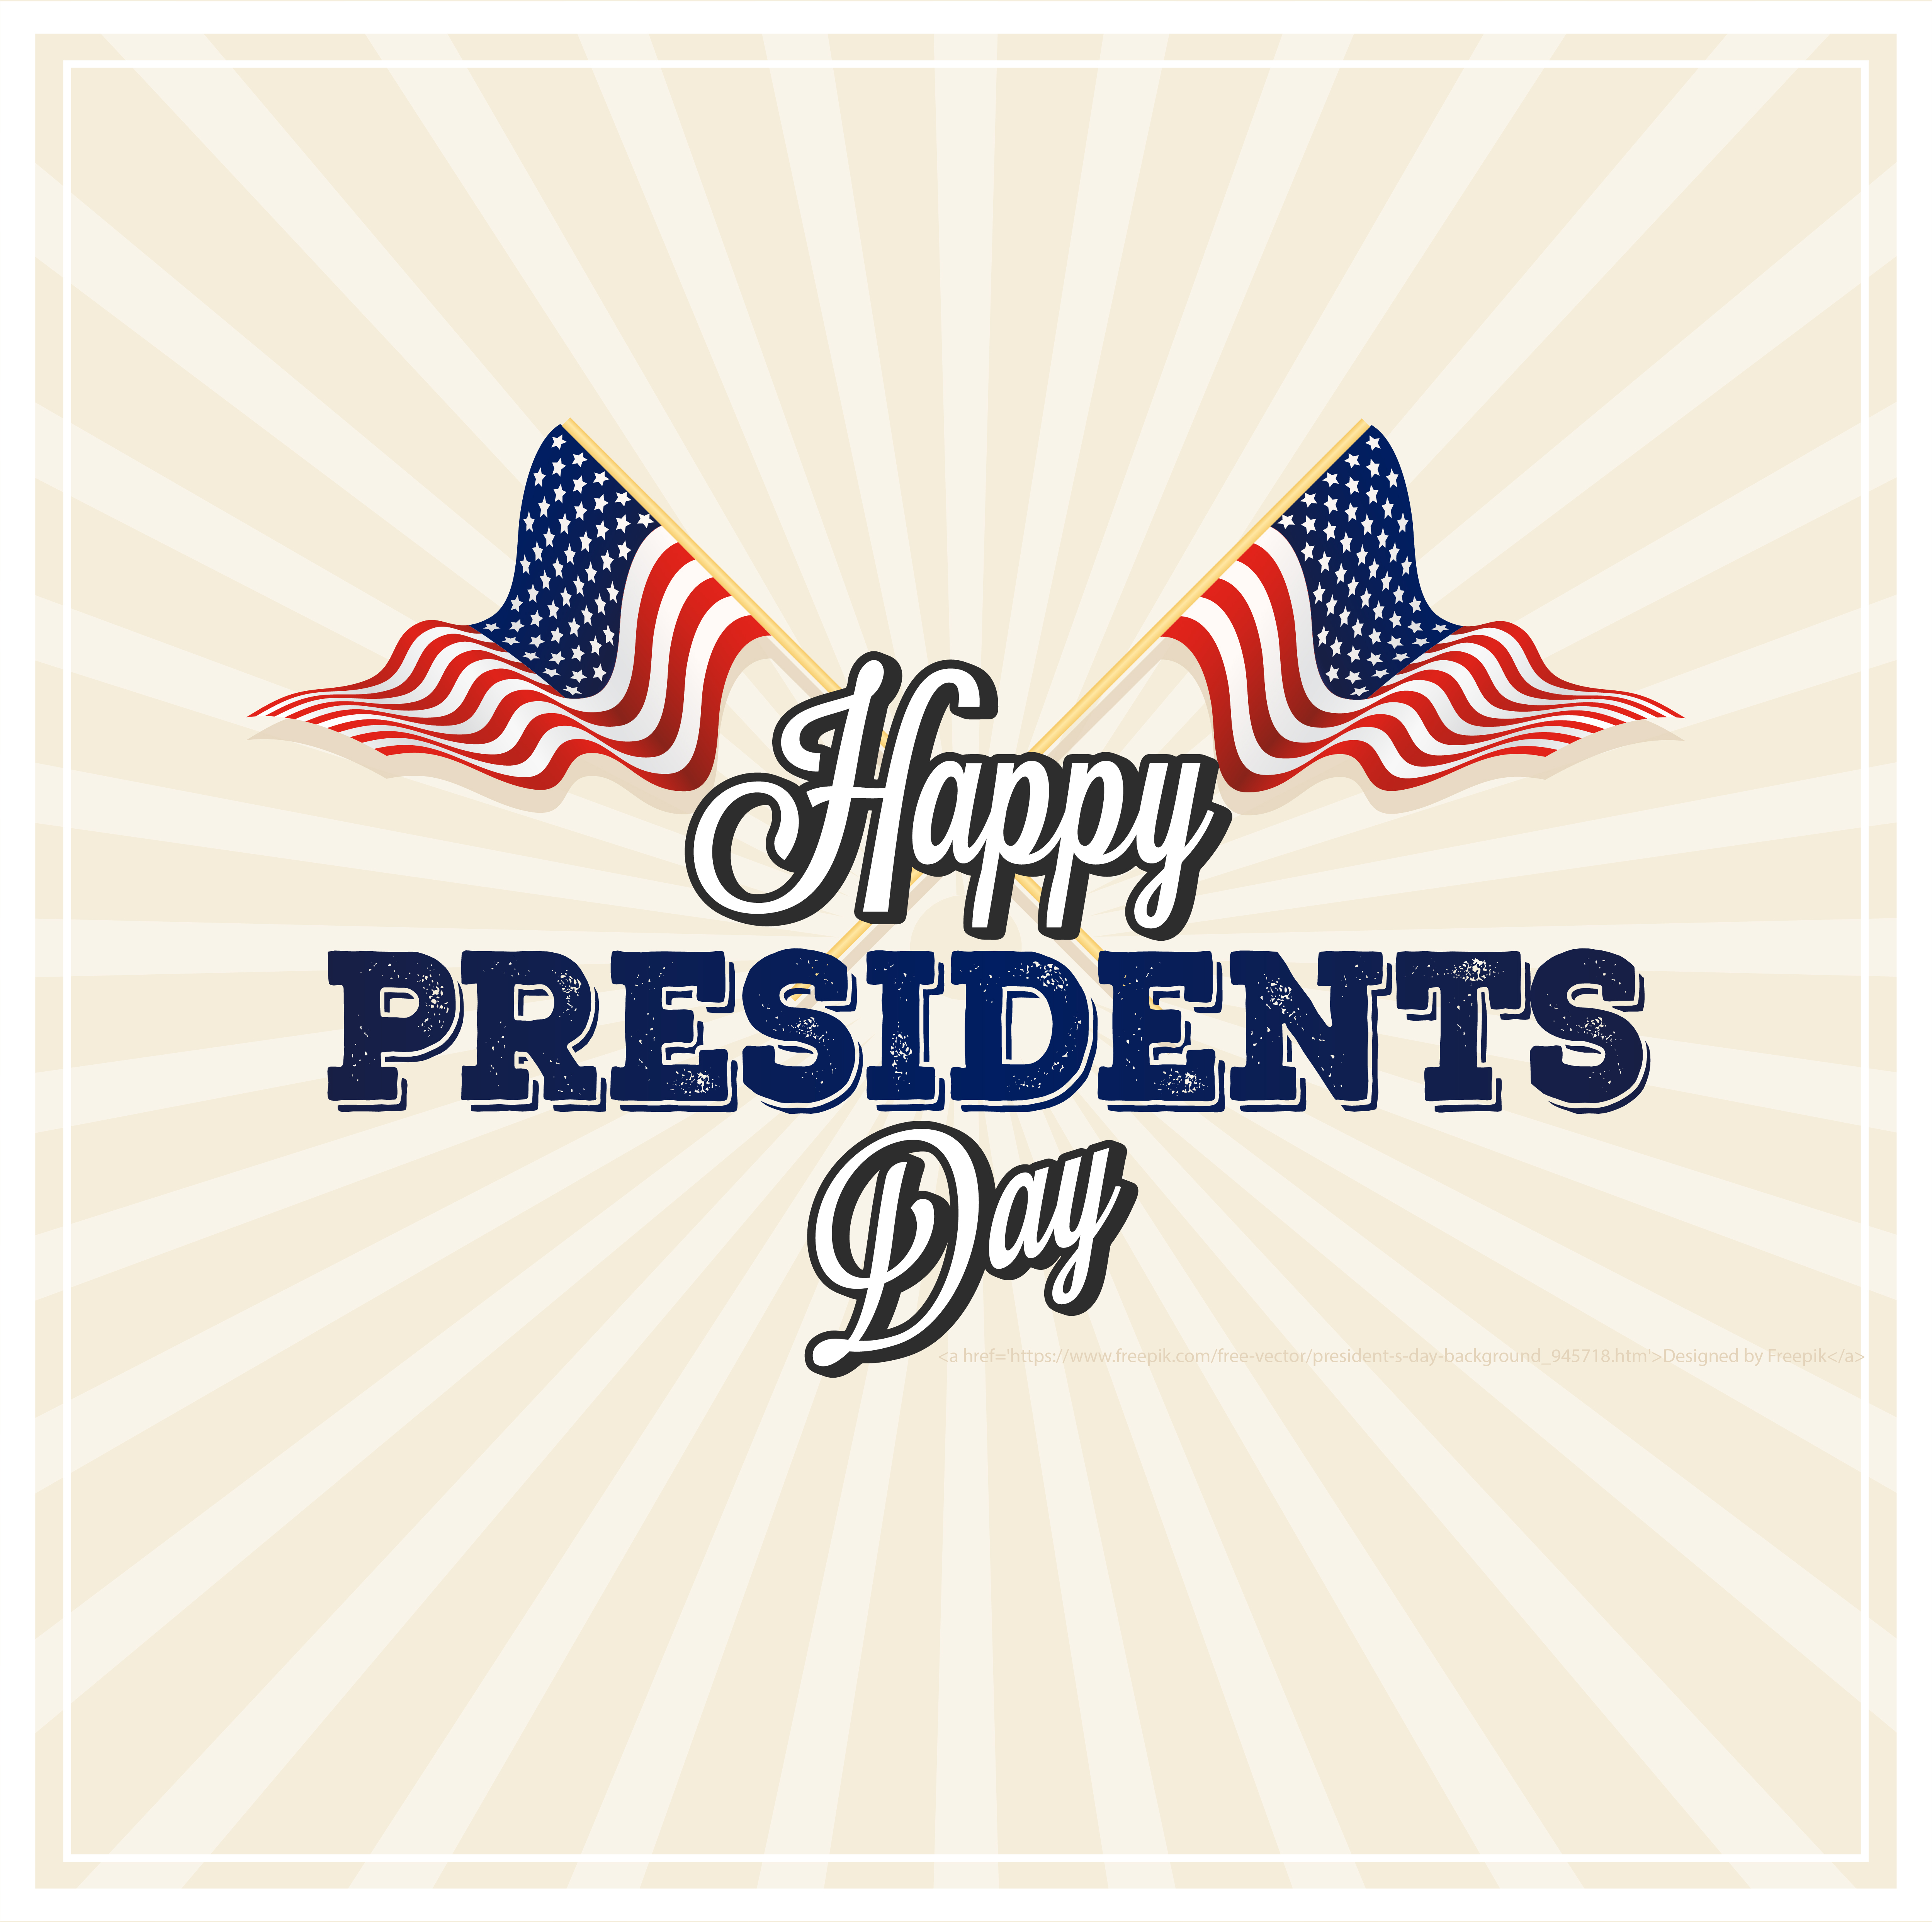 THE STORY OF PRESIDENTS’ DAY The Good Shepherd Community